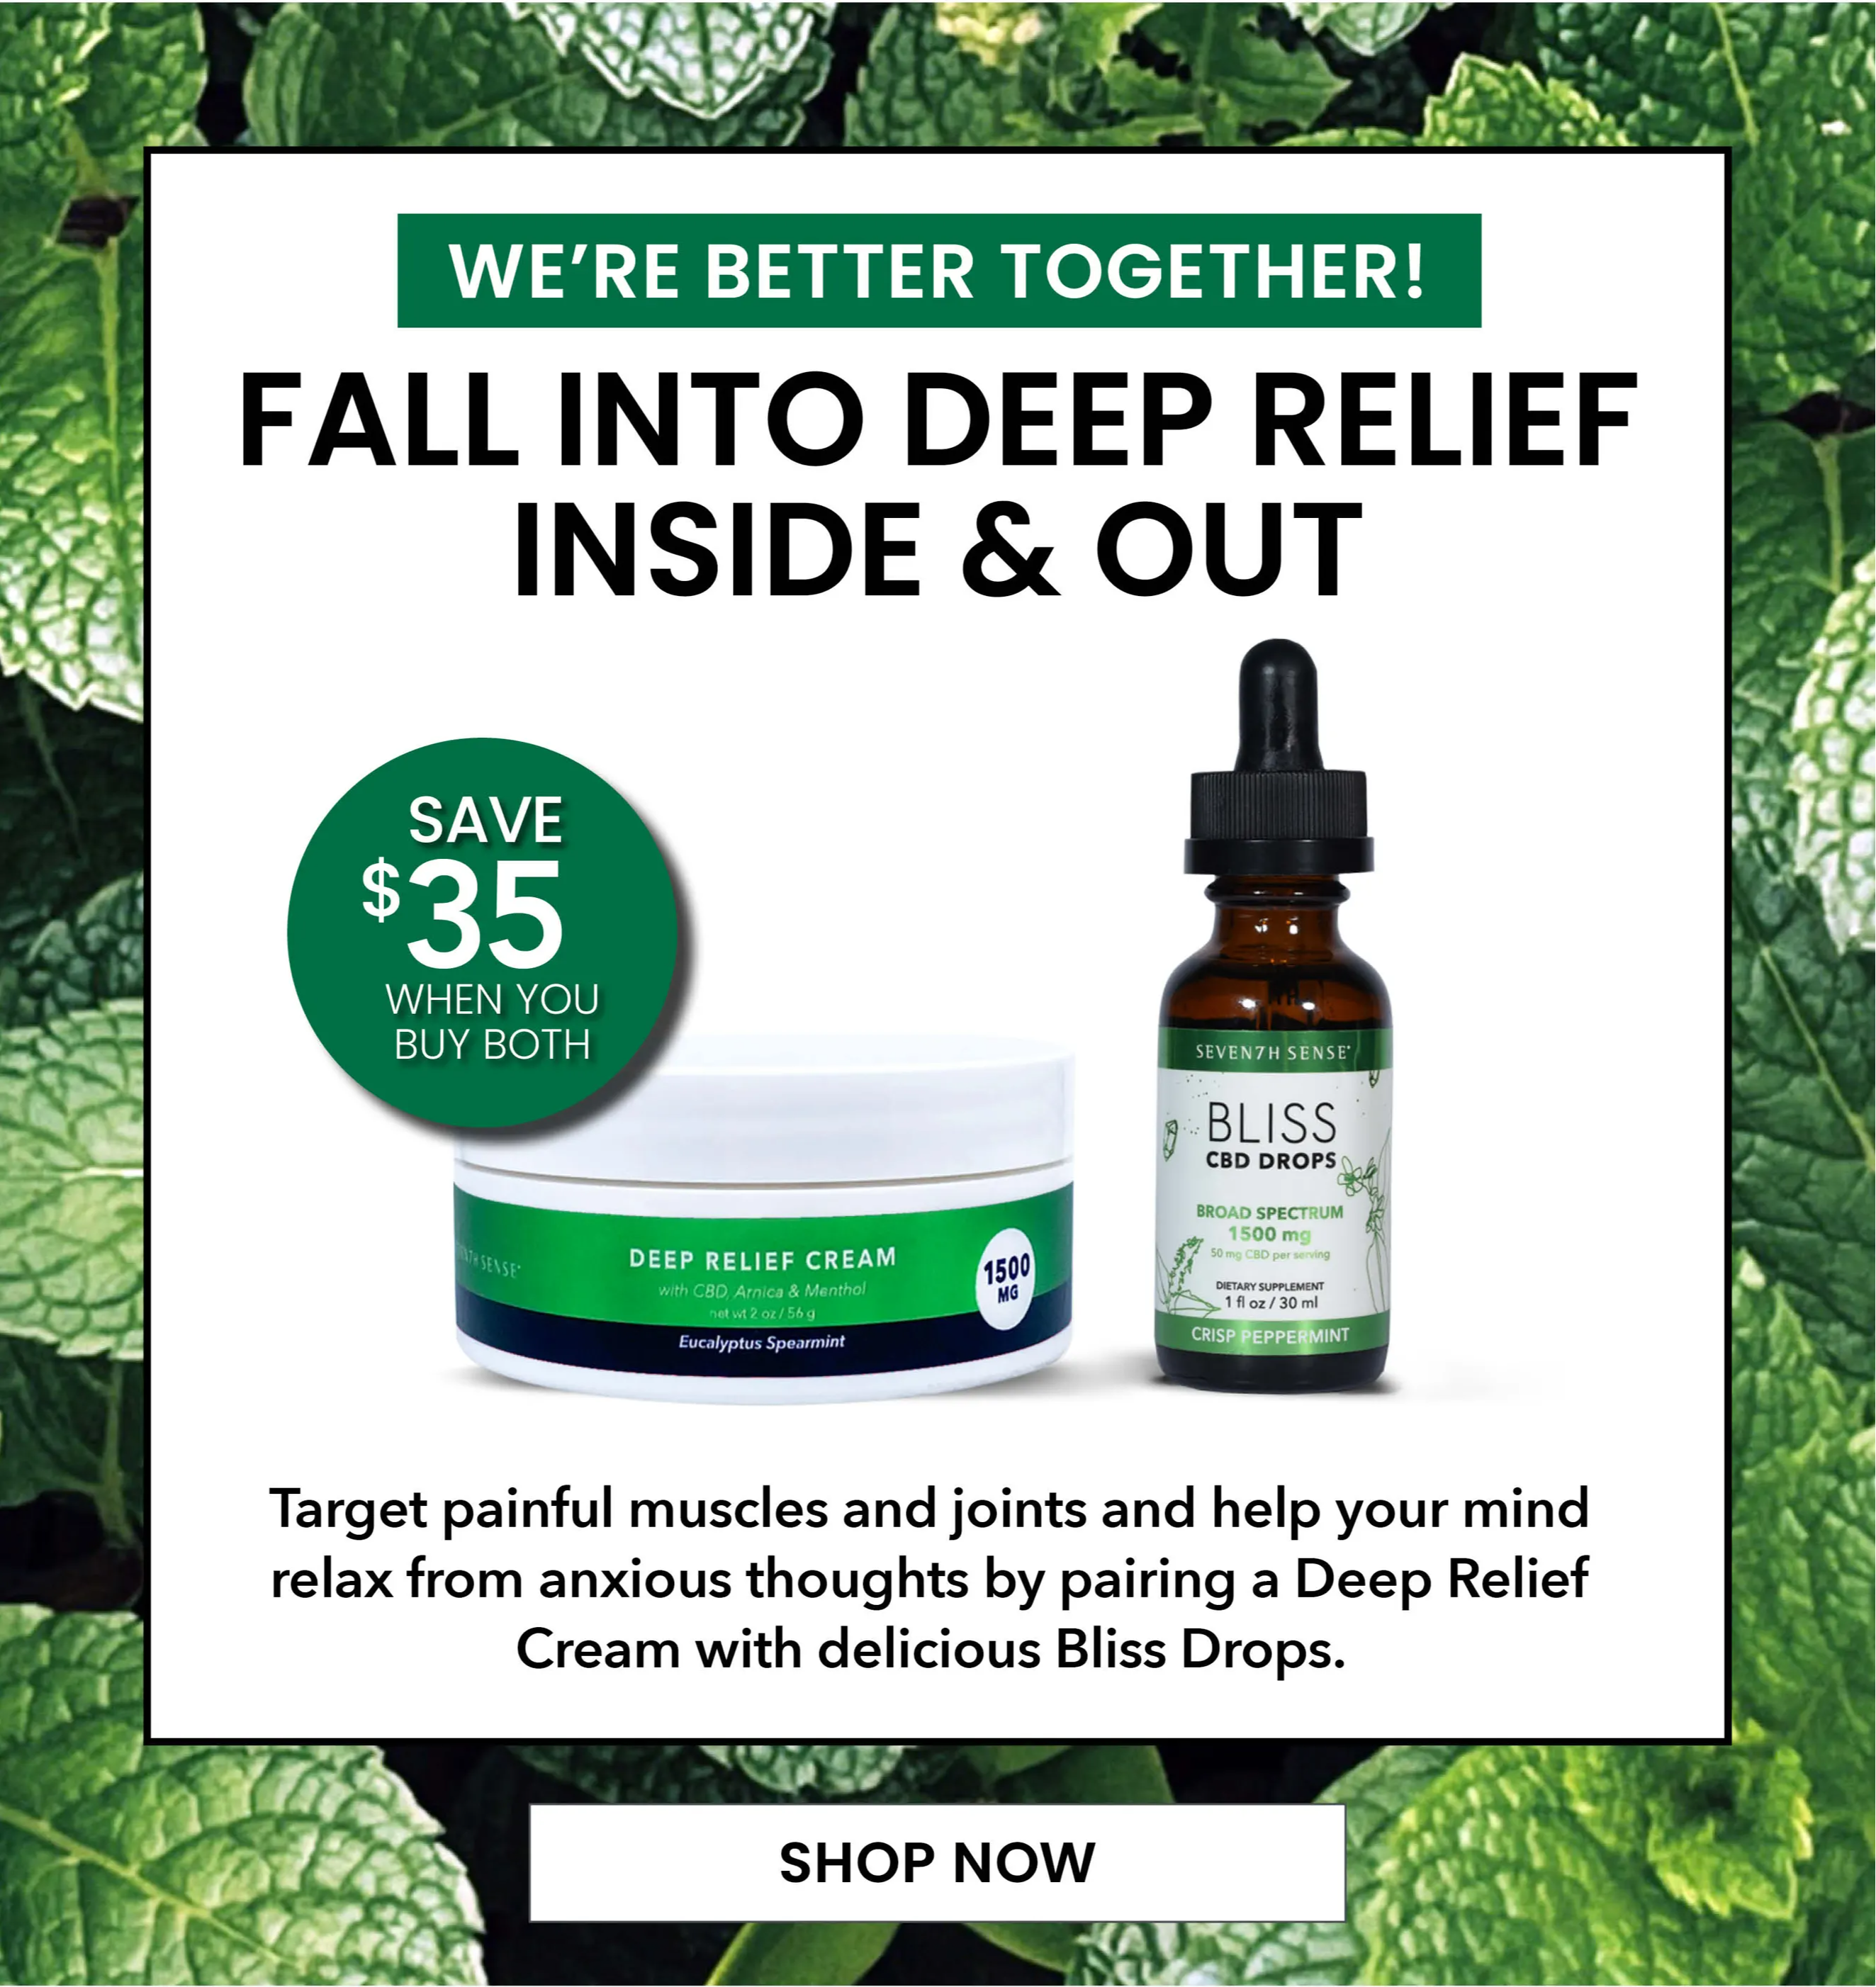 We're better together! Fall into deep relief inside and out.  Target painful muscles and joints and help your mind relax from anxious thoughts by pairing a Deep Relief Cream with delicious Bliss Drops. Shop Now.